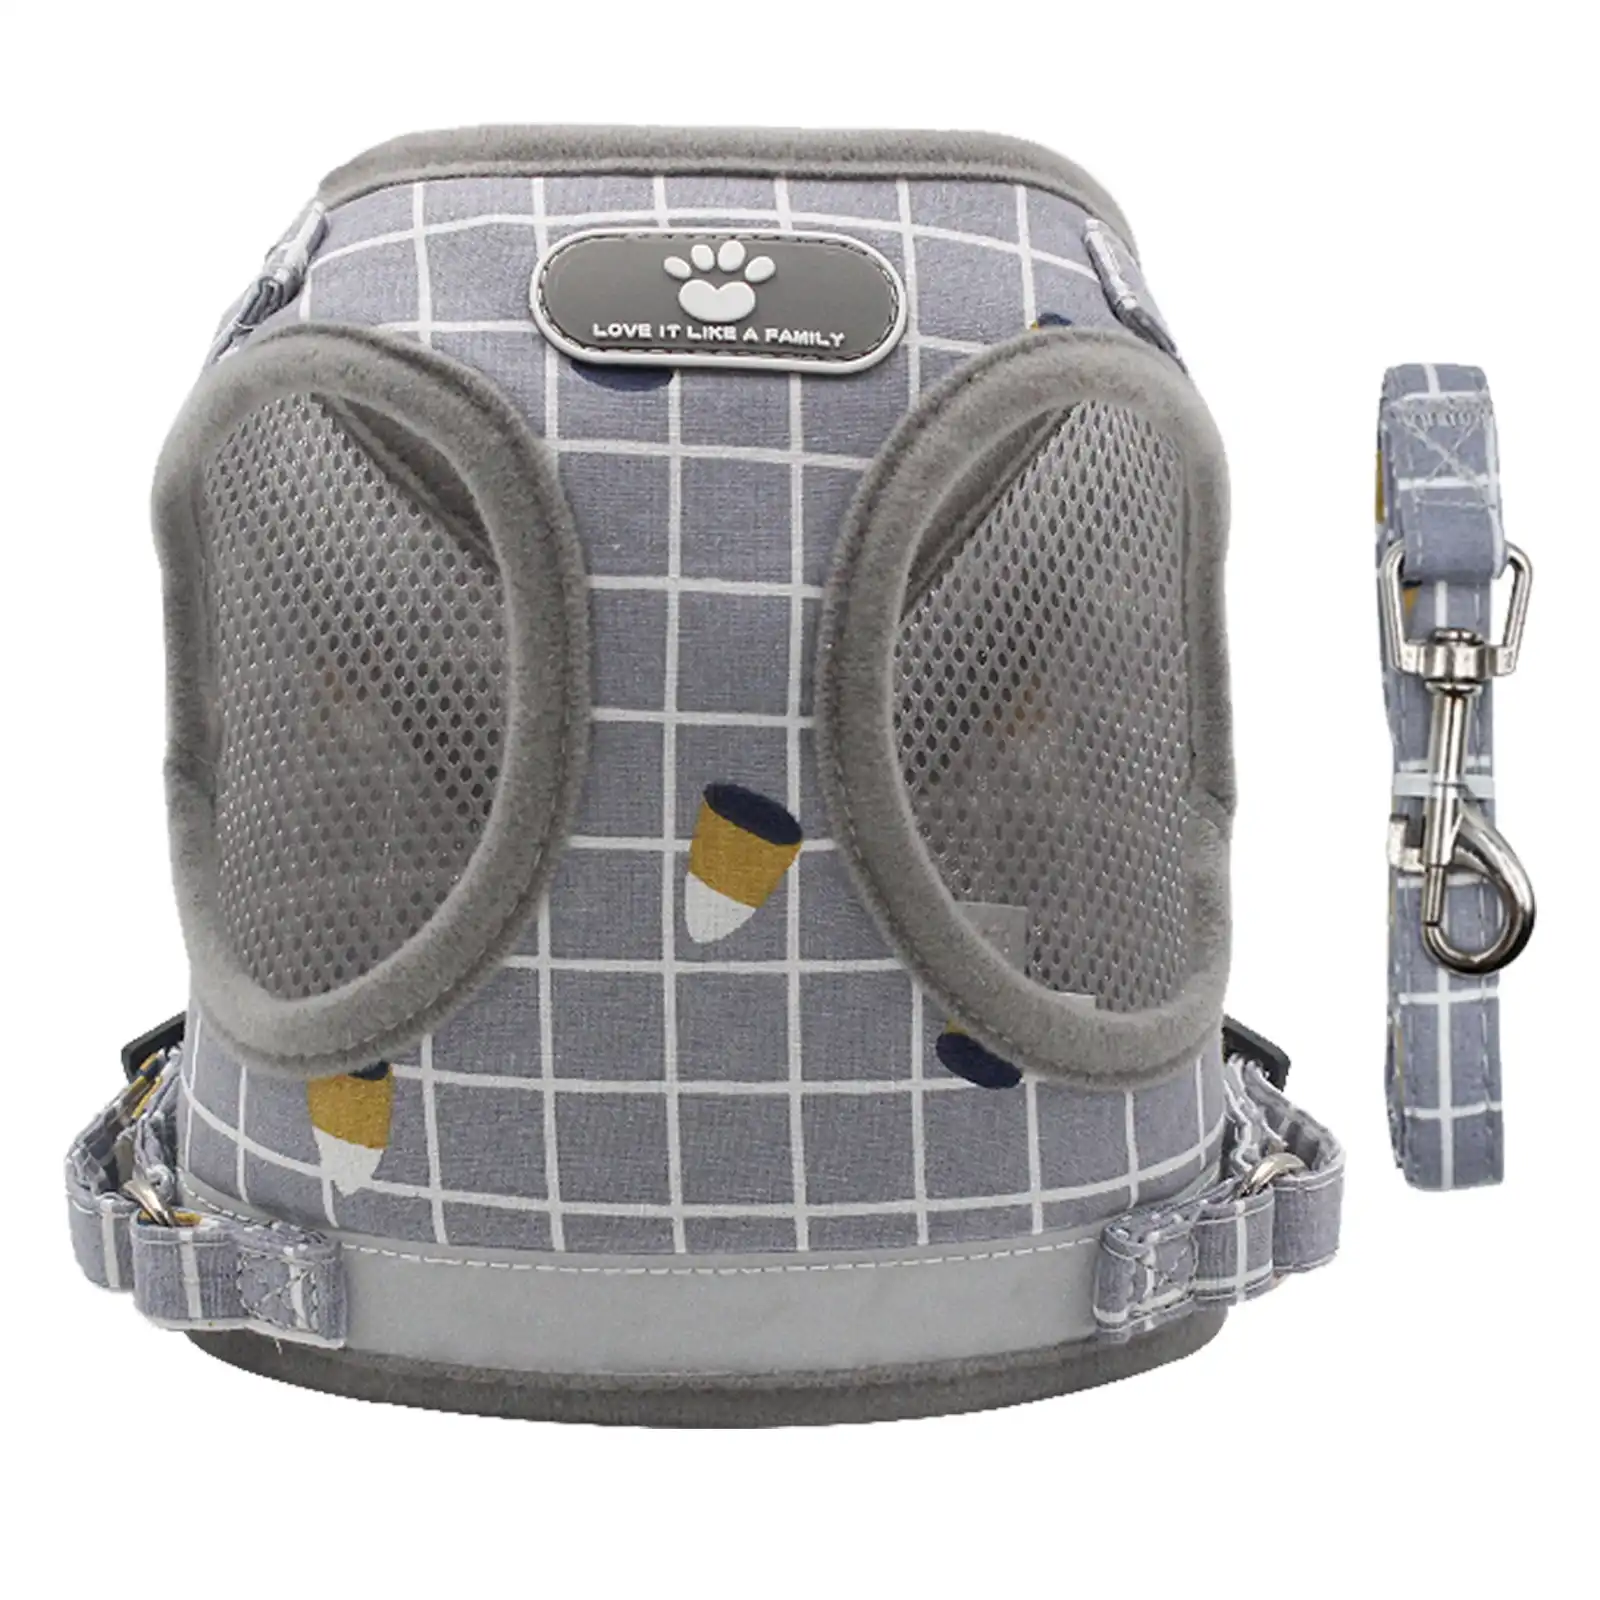 Furbulous No Pull Cat Small Dog Harness and Lead Set Adjustable Reflective Step-in Vest Harnesses Mesh Padded Plaid Escape Proof Puppy Jacket - Grey M